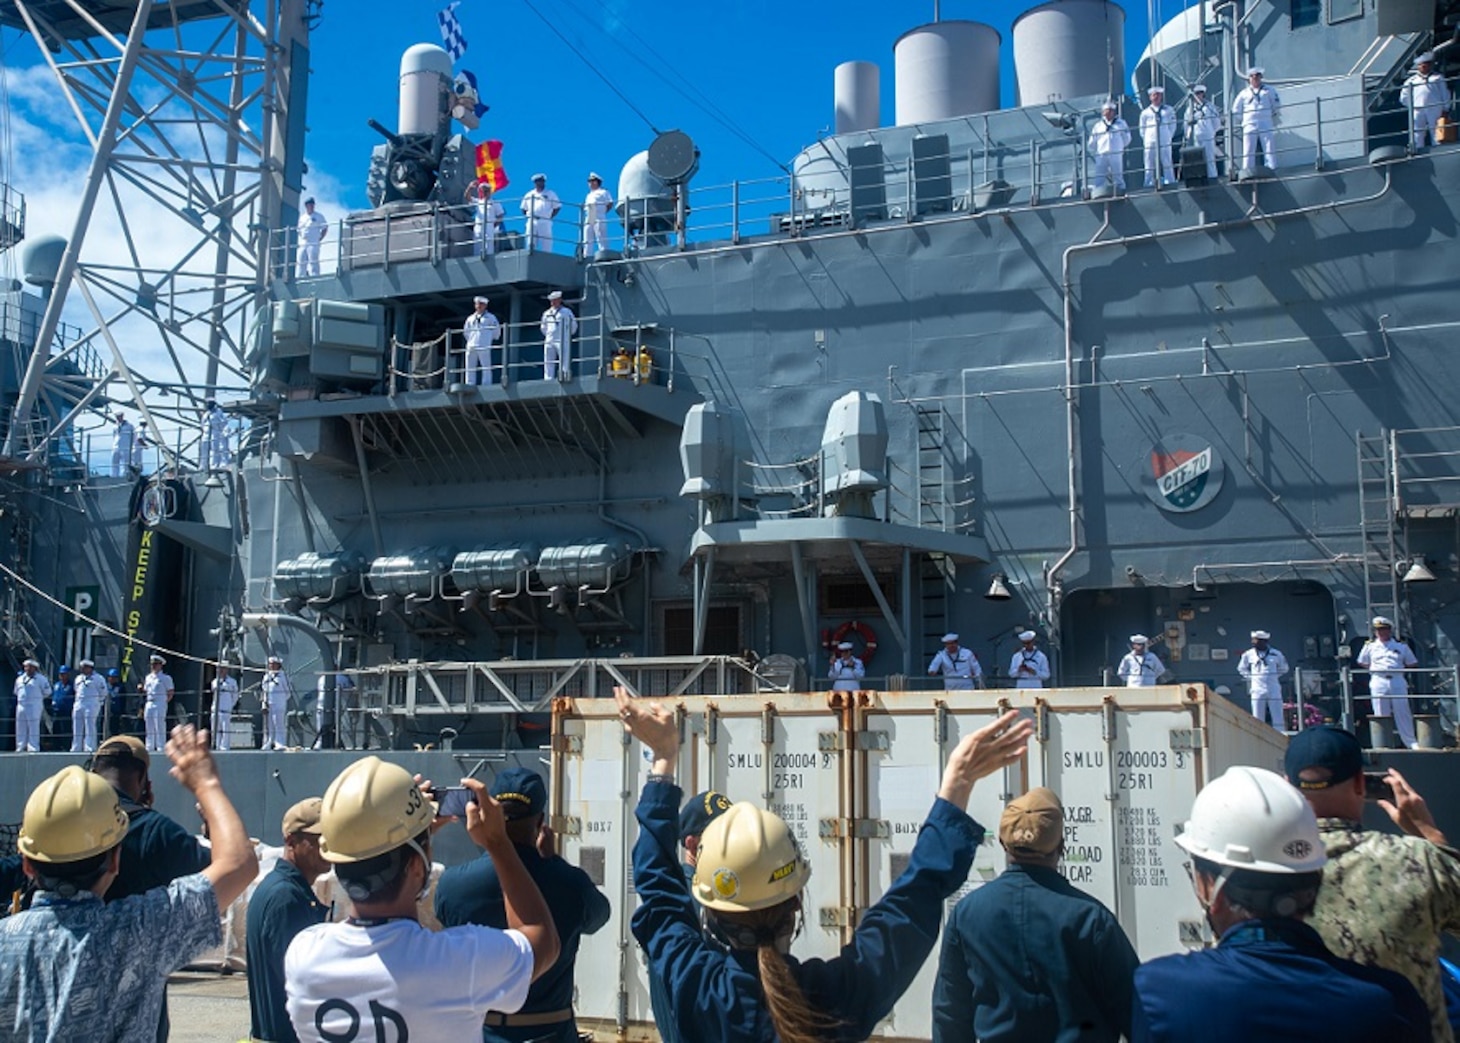 U.S. Navy Sailors and members of Ship Repair Facility (SRF) Yokosuka wave to the Ticonderoga-class guided-missile cruiser USS Shiloh (CG 67) in Yokosuka, Japan, Sept. 5, 2023. Shiloh departed Yokosuka on Sept. 5 to transit to its new homeport of Pearl Harbor, Hawaii, as part of a planned rotation of forces in the Pacific. Shiloh is attached to Commander, Carrier Strike Group 5 forward-deployed to the U.S. 7th Fleet area of operations in support of a free and open Indo Pacific. (U.S. Navy photo by Mass Communication Specialist 2nd Class Askia Collins)